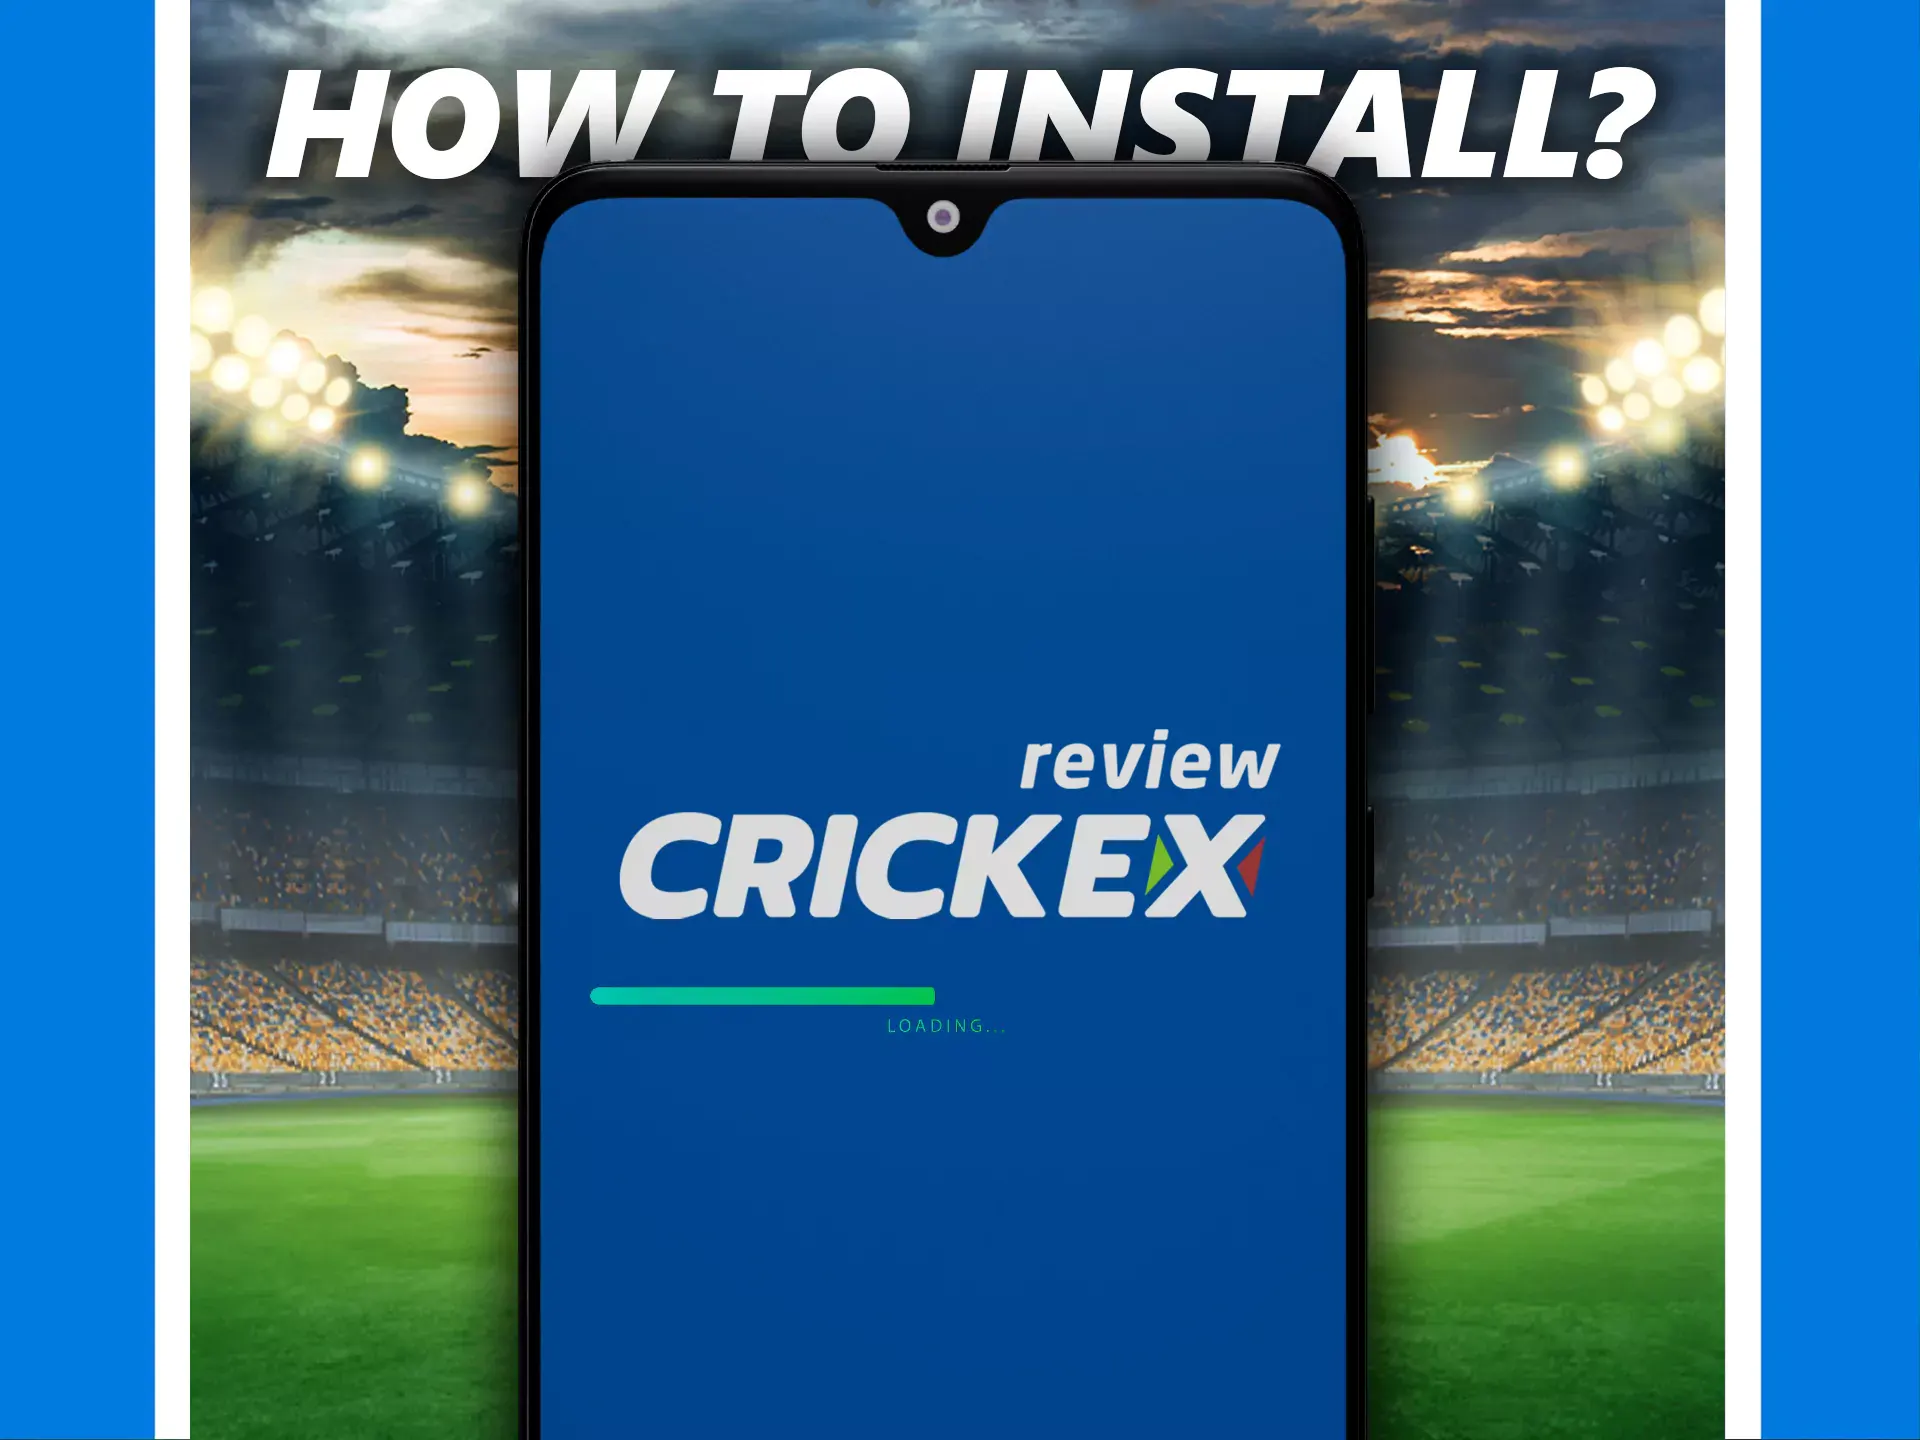 Install the Crickex app following the instructions below.